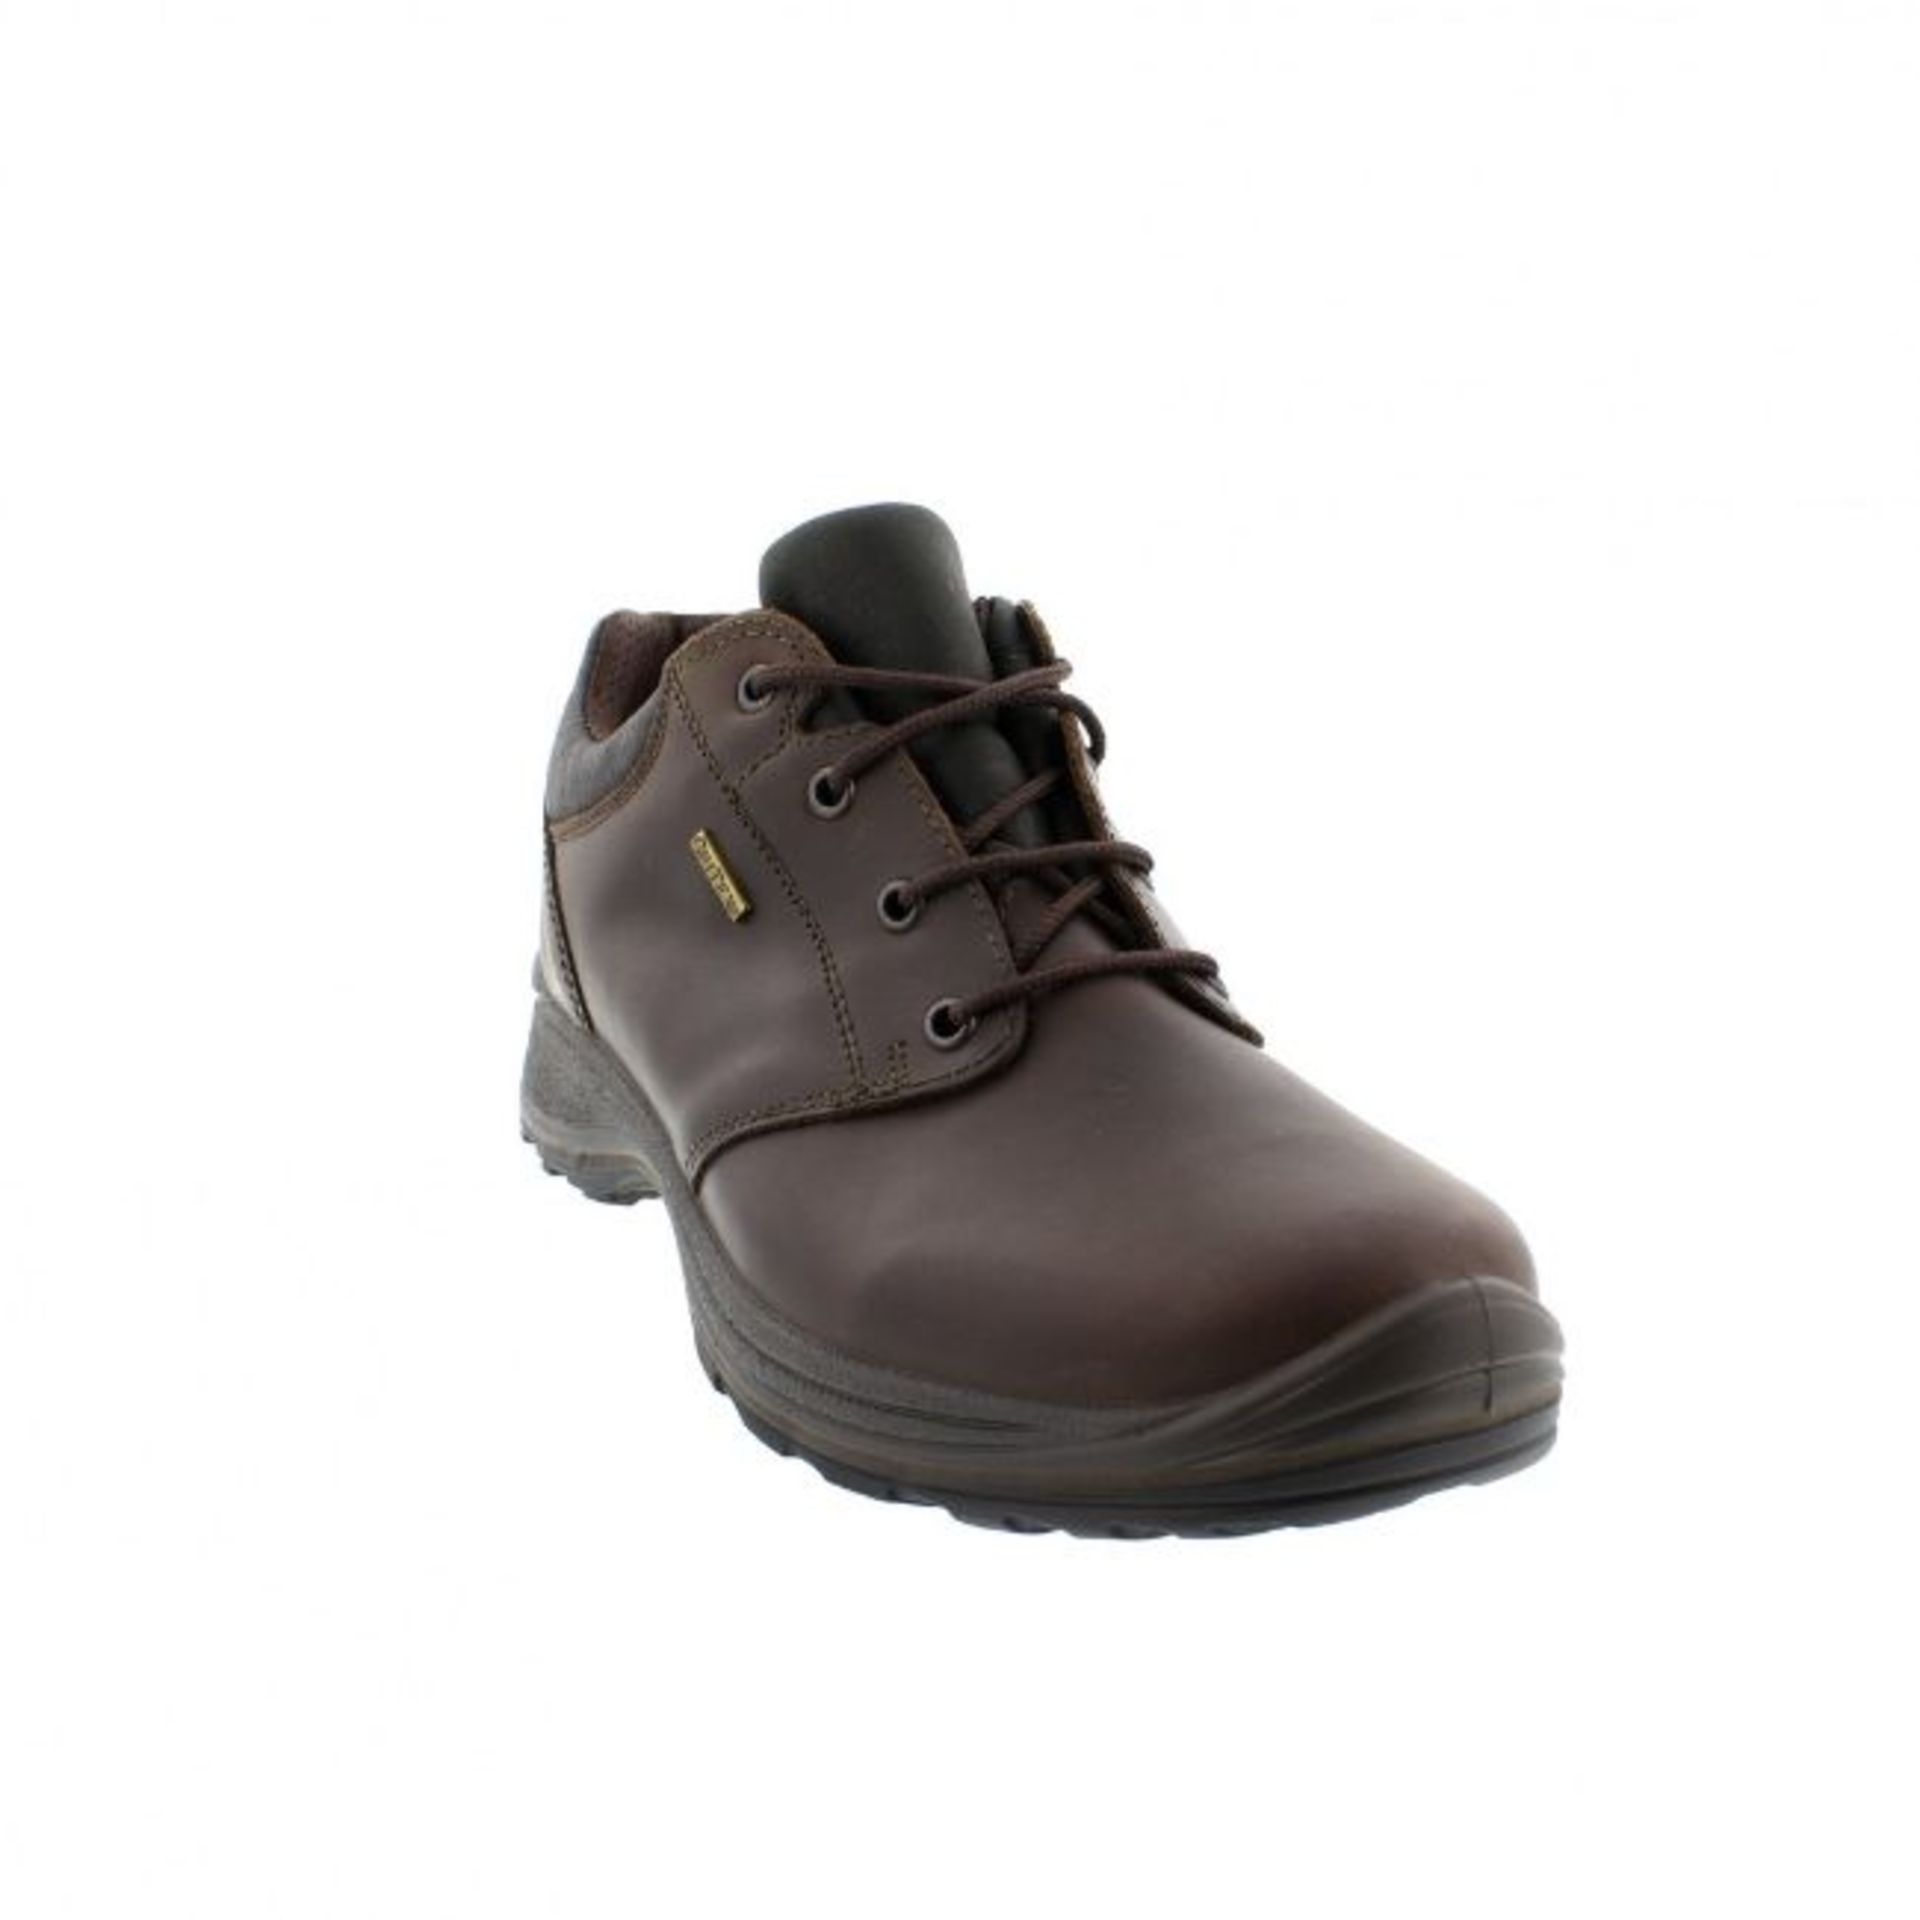 1 x Pair of Men's Grisport Brown Leather GriTex Shoes - Rogerson Footwear - Brand New and Boxed - - Image 7 of 8